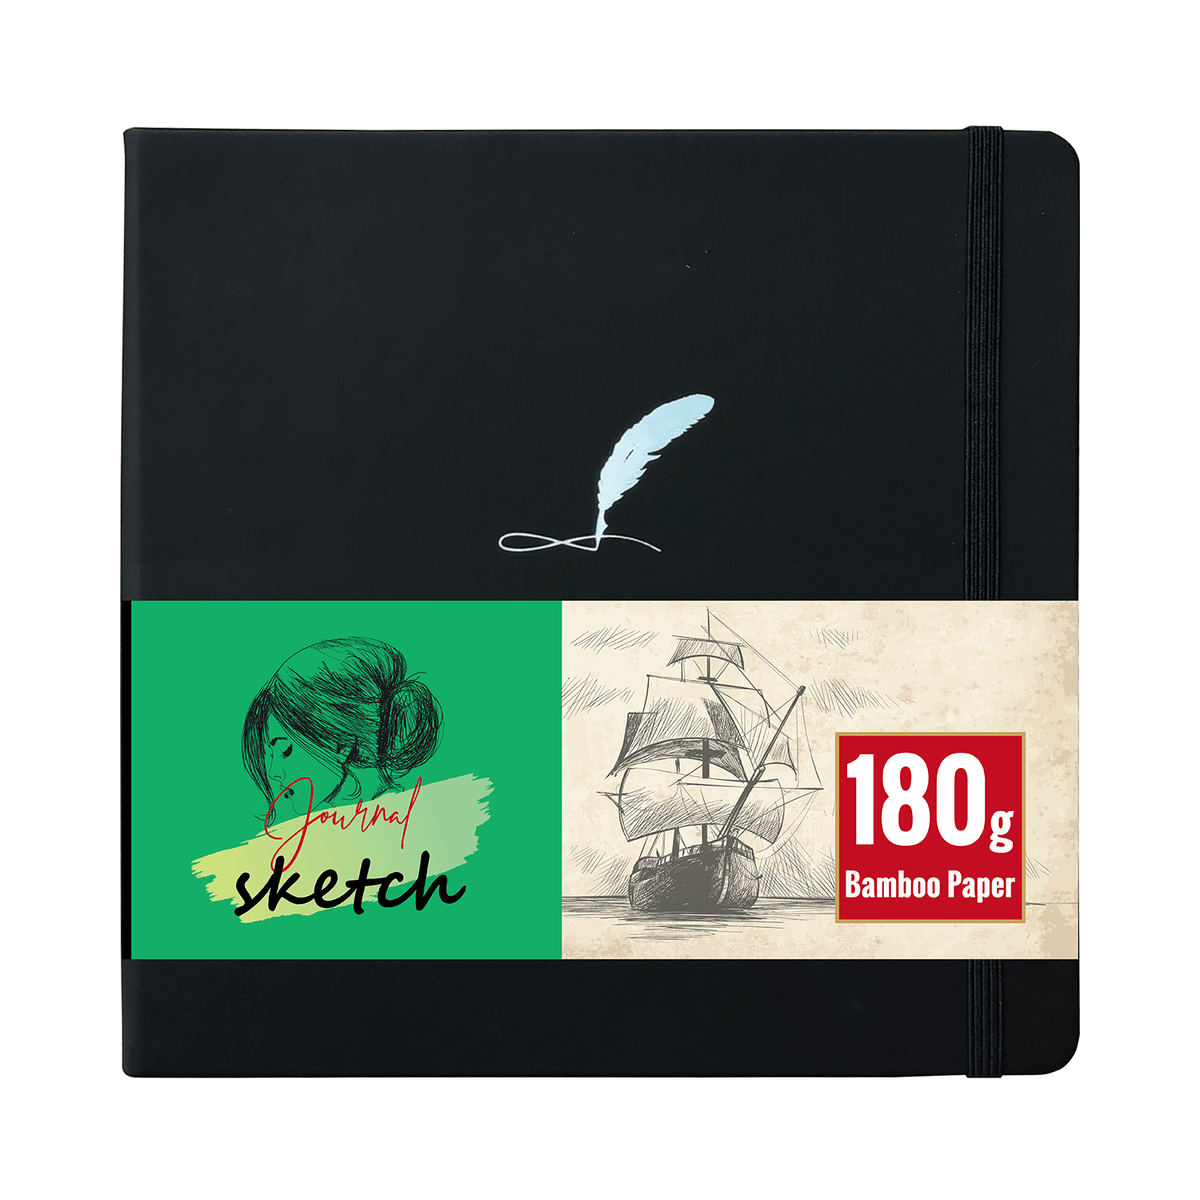 8X8 Square Hardcover SKetchbook Journal 180GSM Bamboo PAPER 128 Pages - Black - bukenotebook